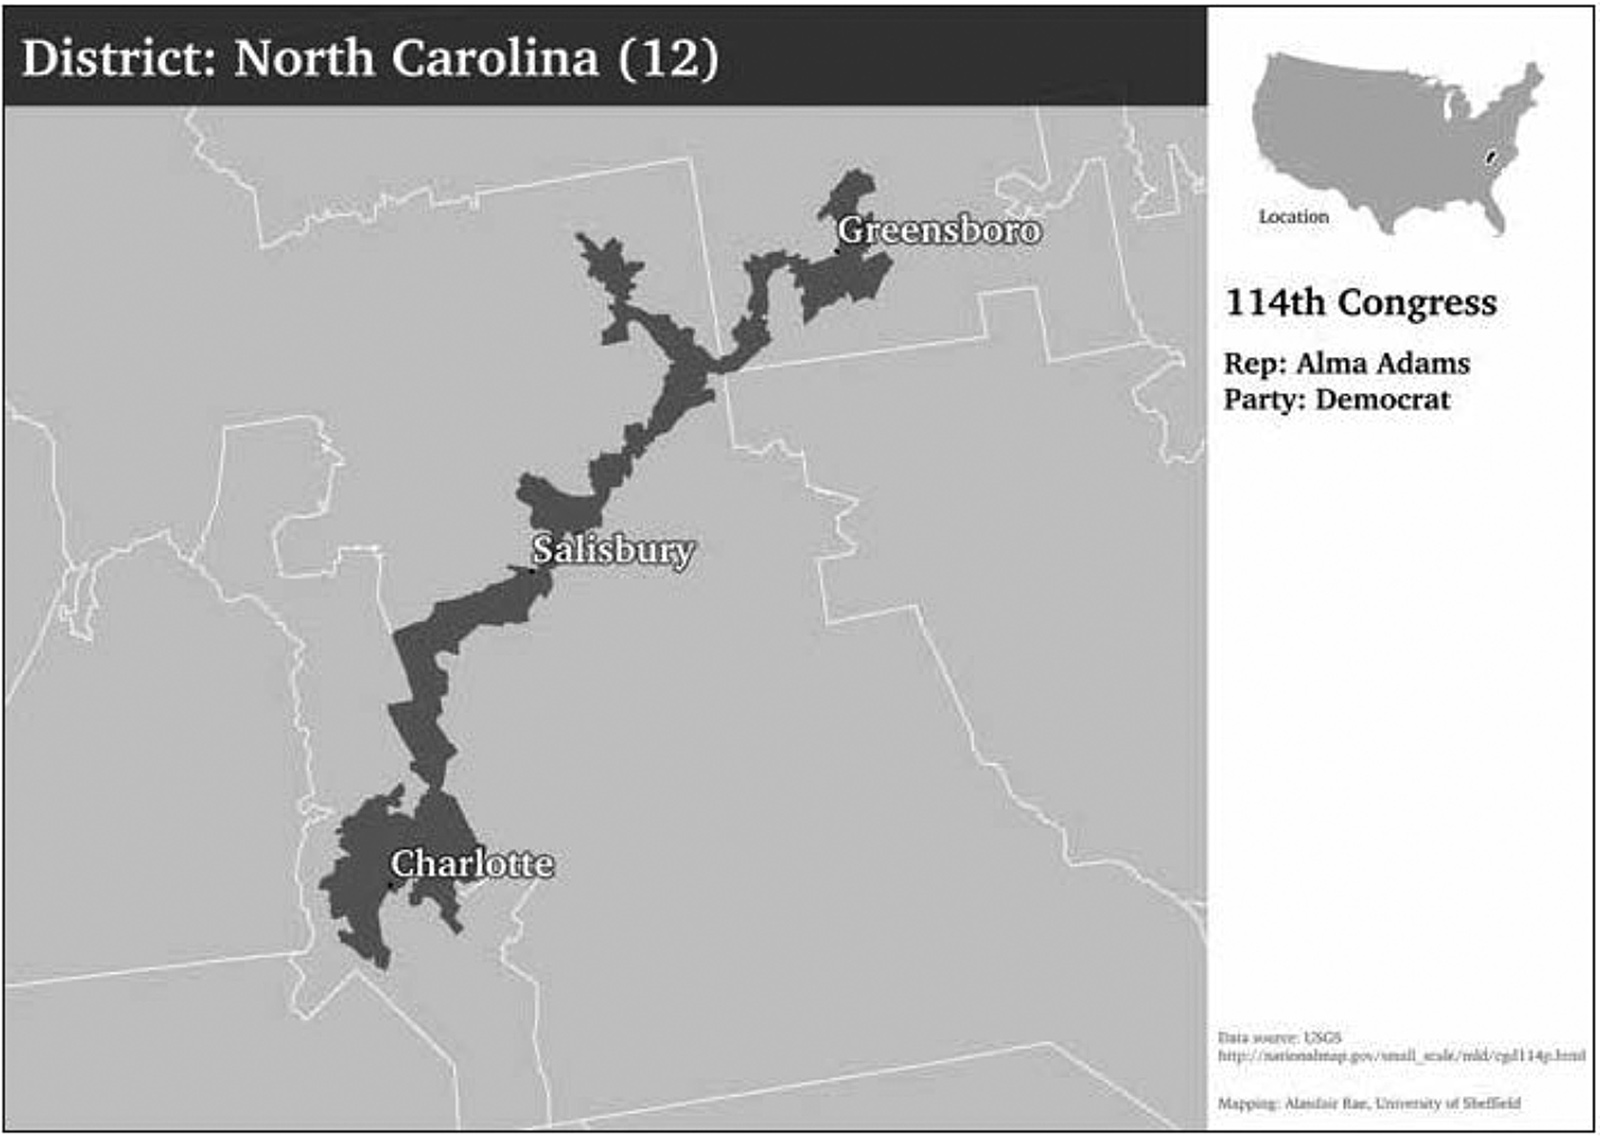 North Carolina’s gerrymandered 12th congressional district, which, ‘it has been said, “respects no county lines, no city limits, no test of common sense”’; from David Daley’s Ratf**ked